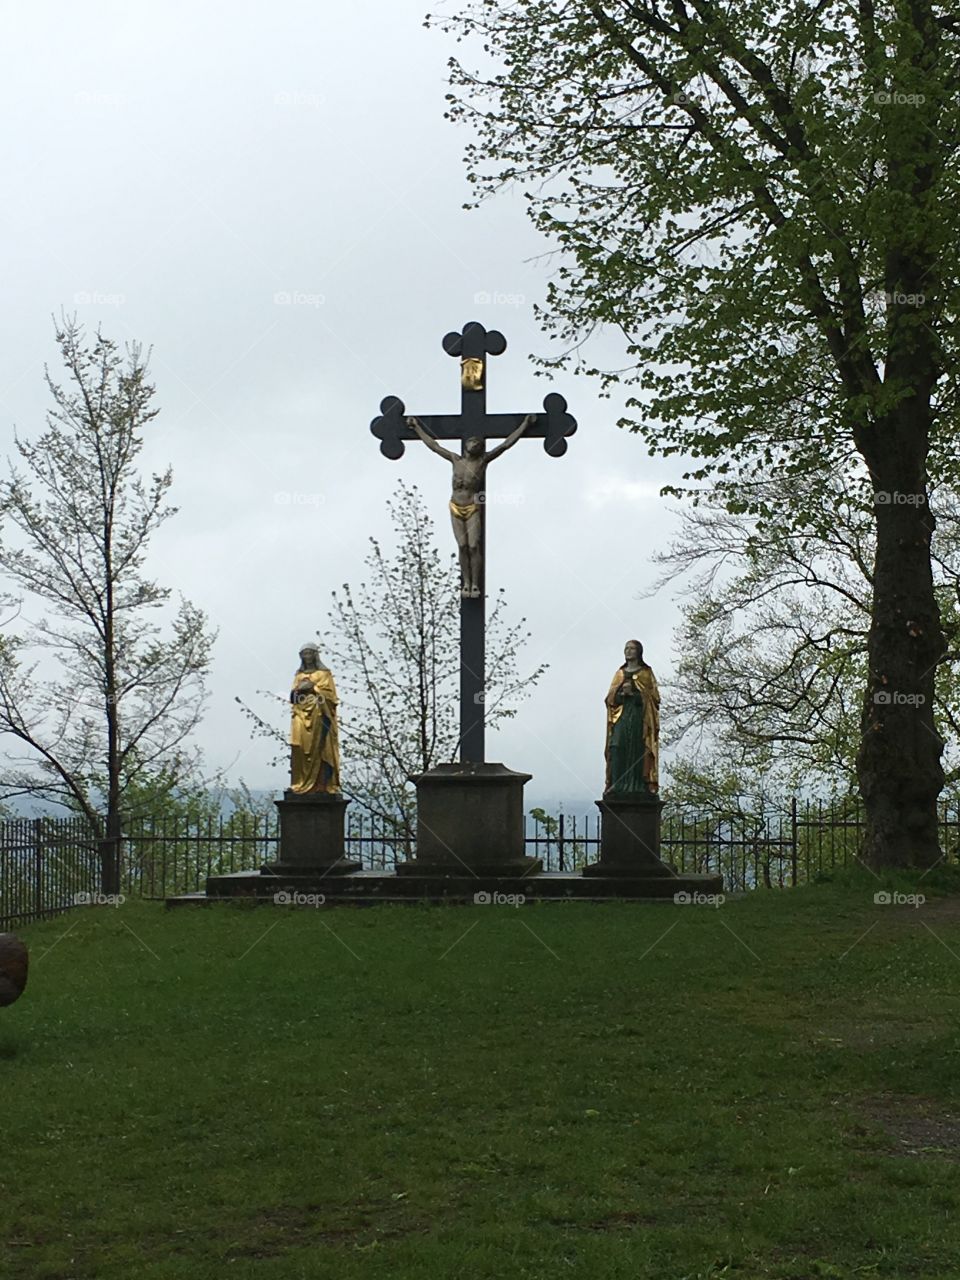 No Person, Cemetery, Tree, Cross, Outdoors